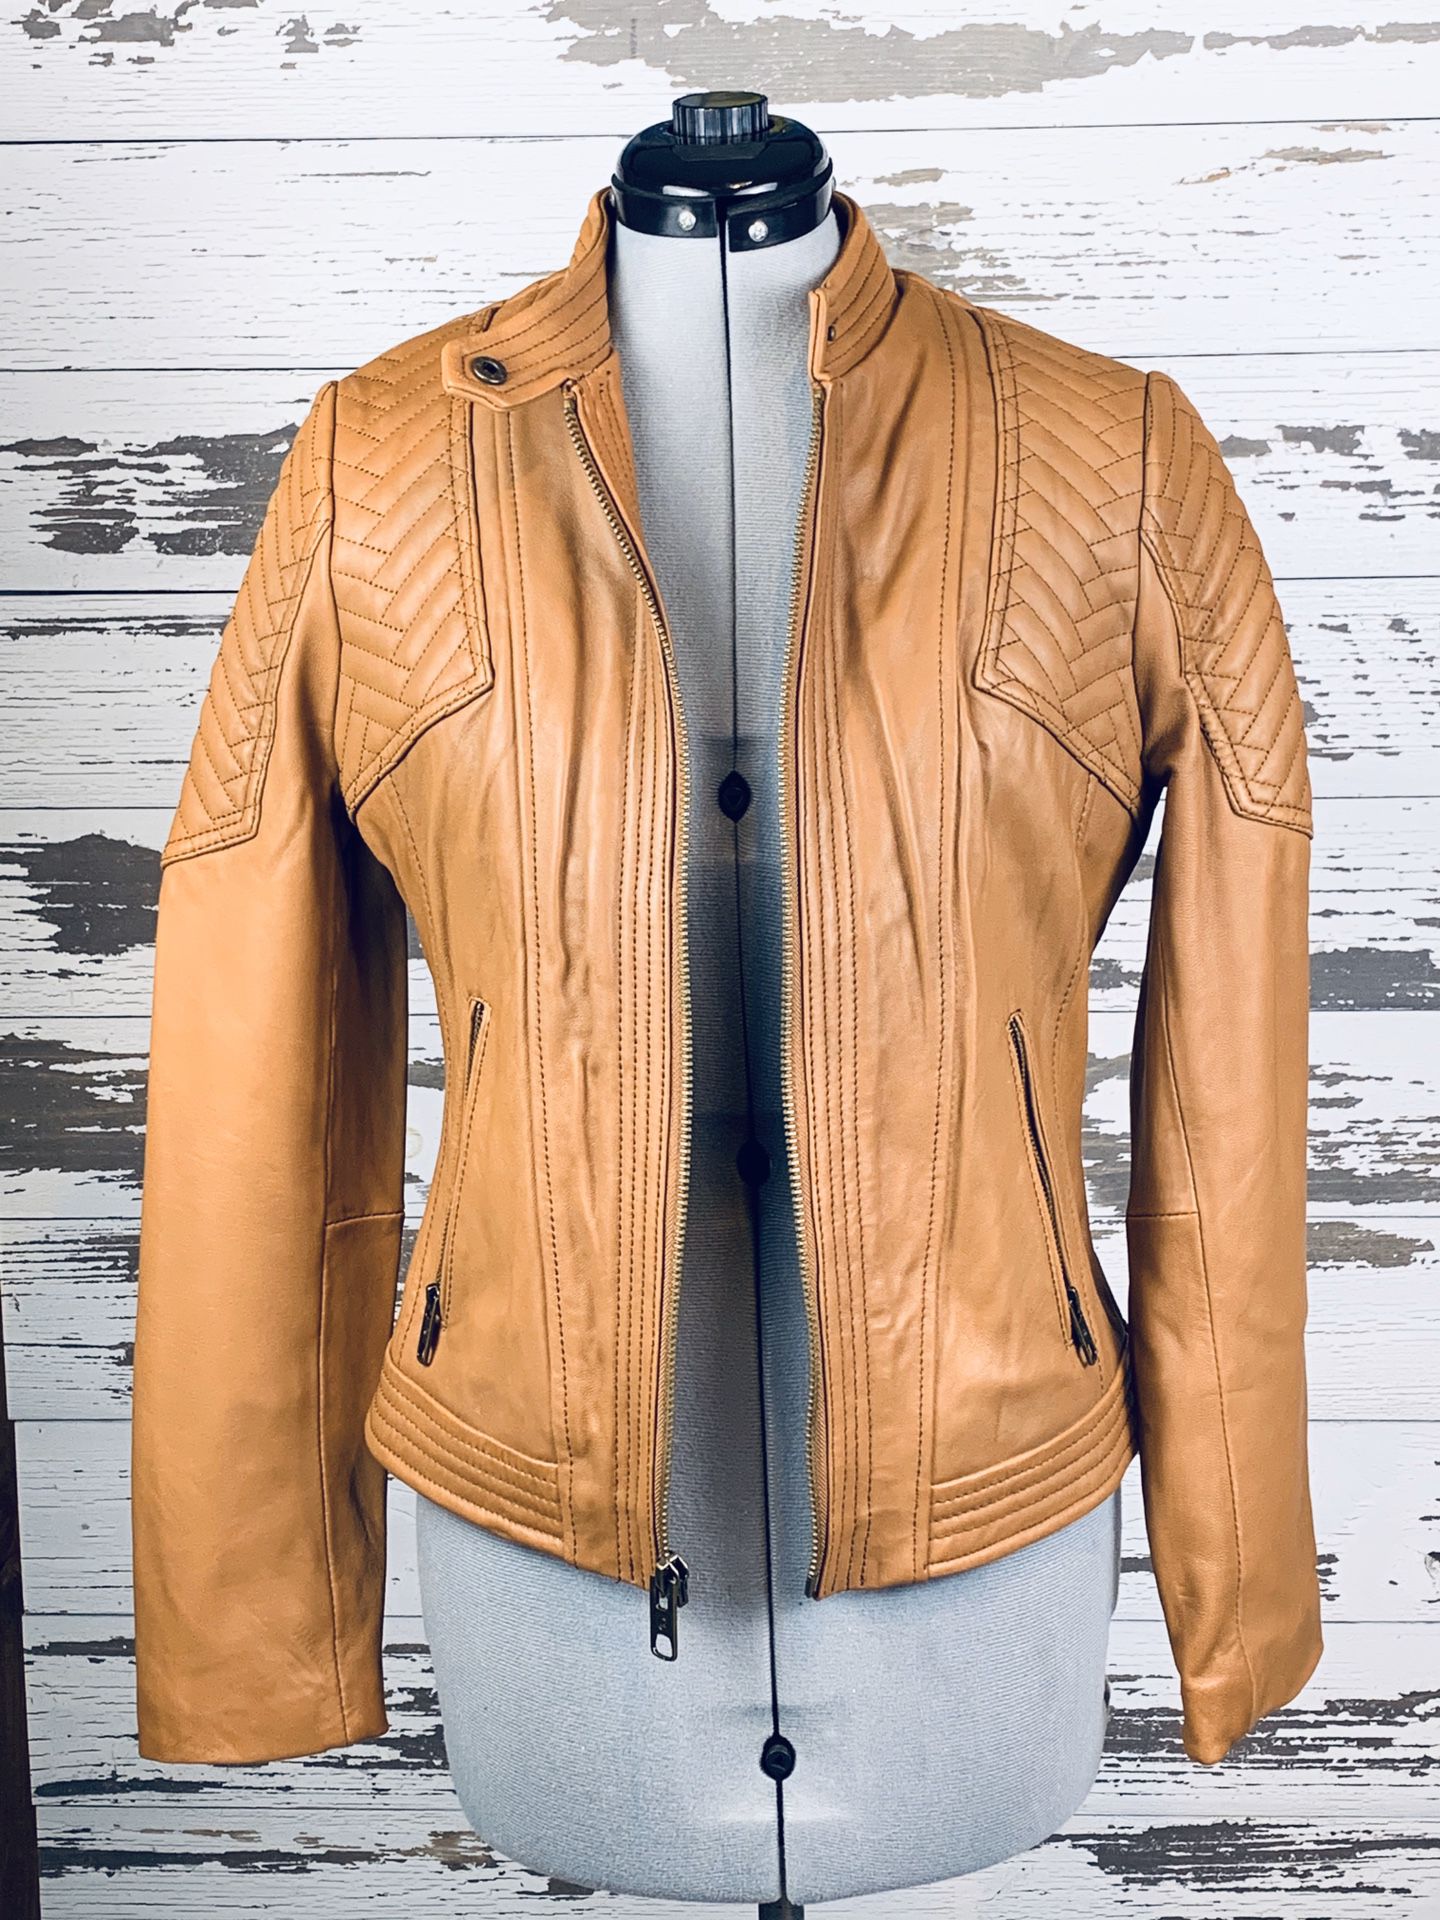 100% Authentic New Michael Kors Real Leather Jacket